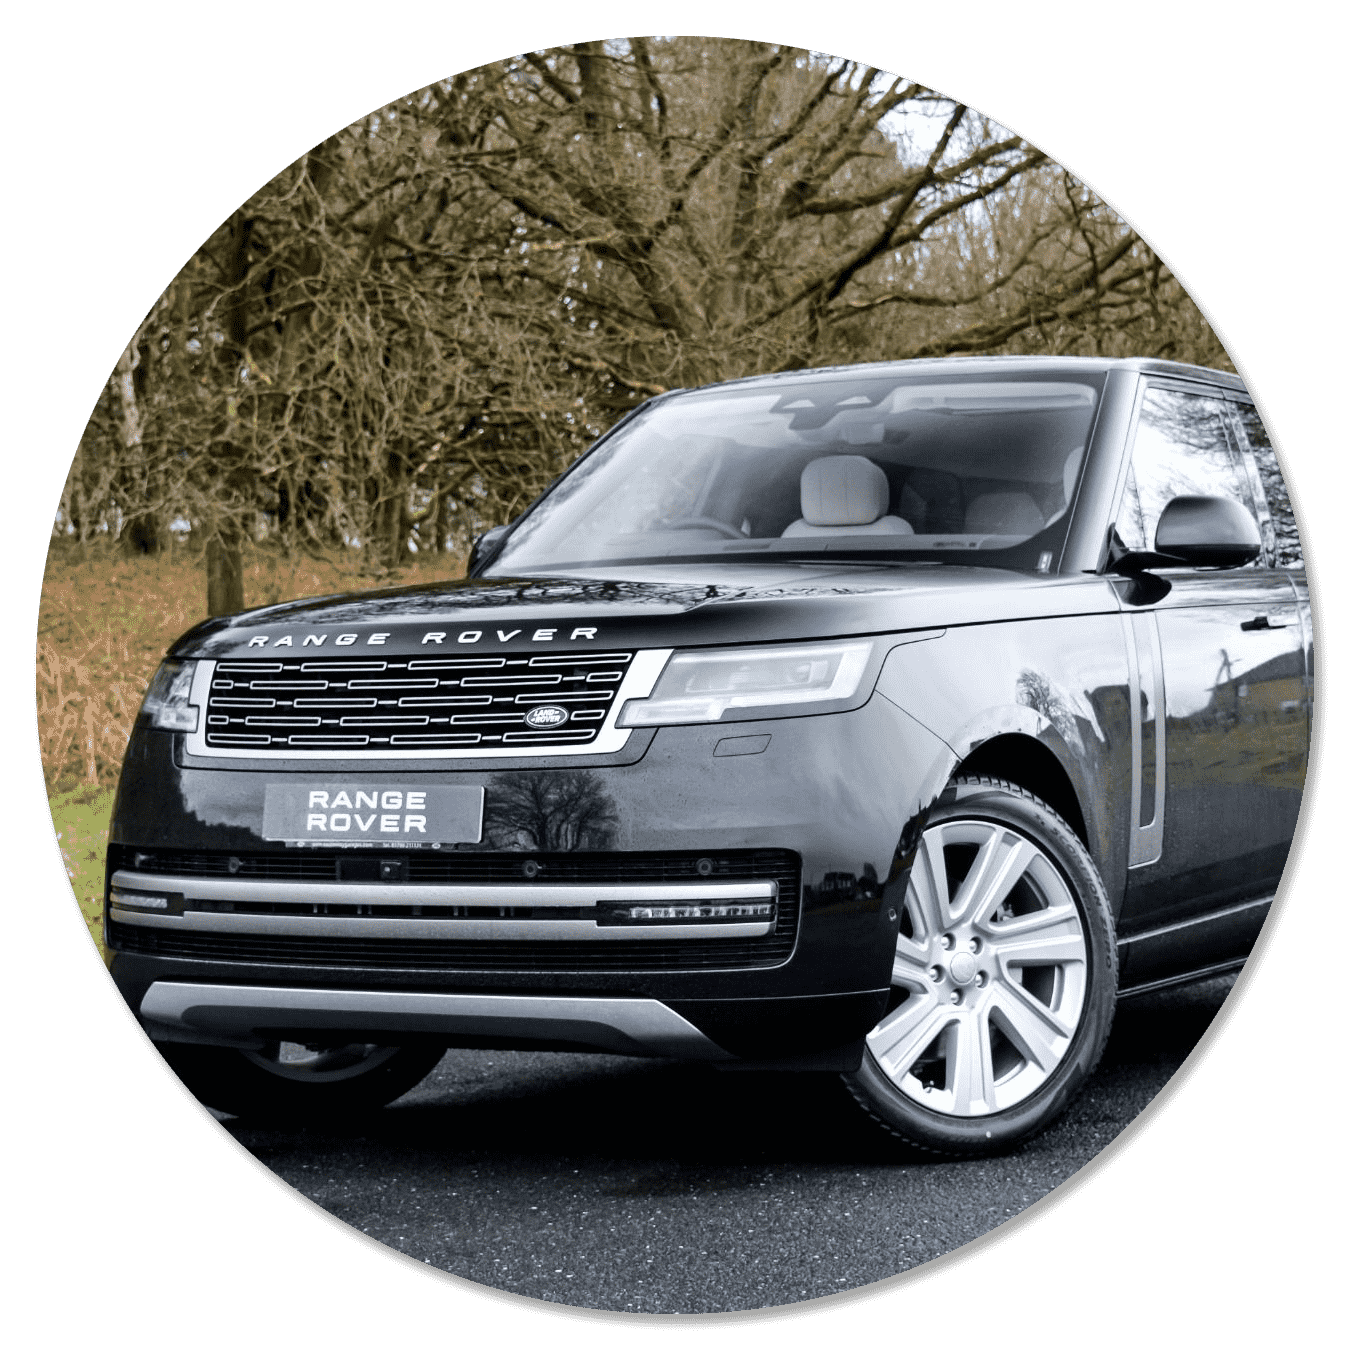 Thatcham Trackers: Insurance-Approved Vehicle Trackers